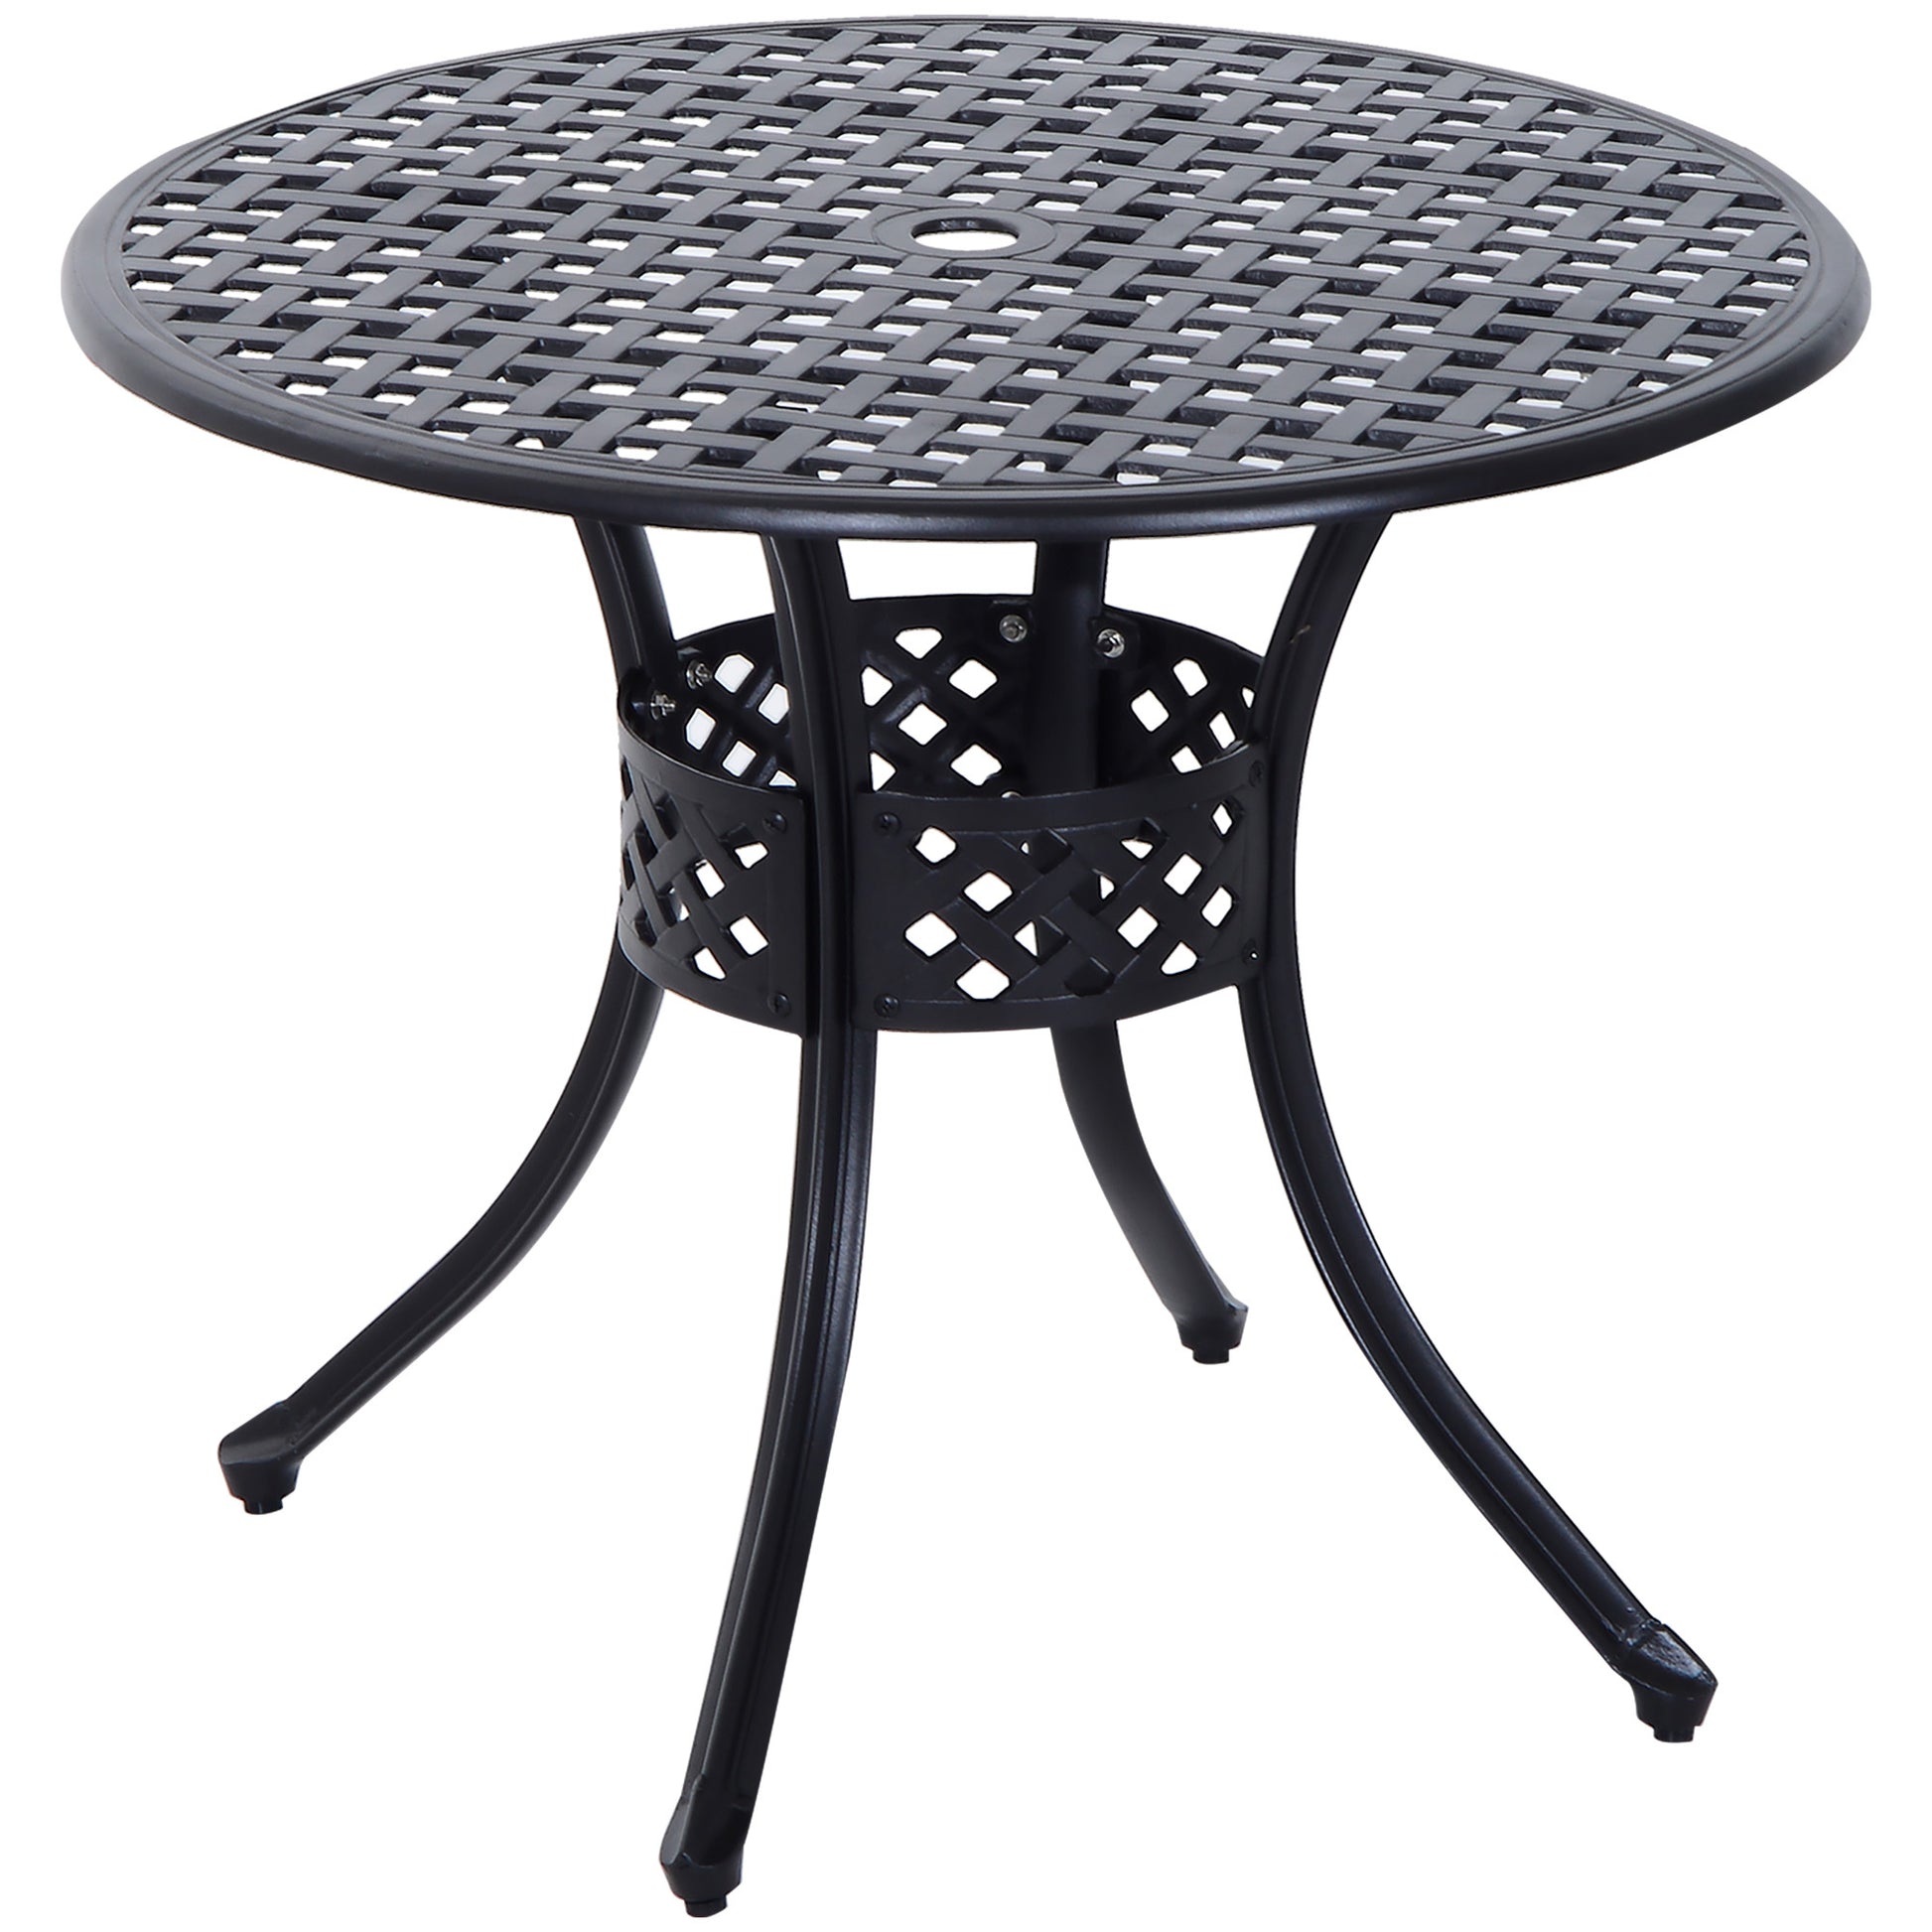 Outsunny 33" Patio Dining Table Round Cast